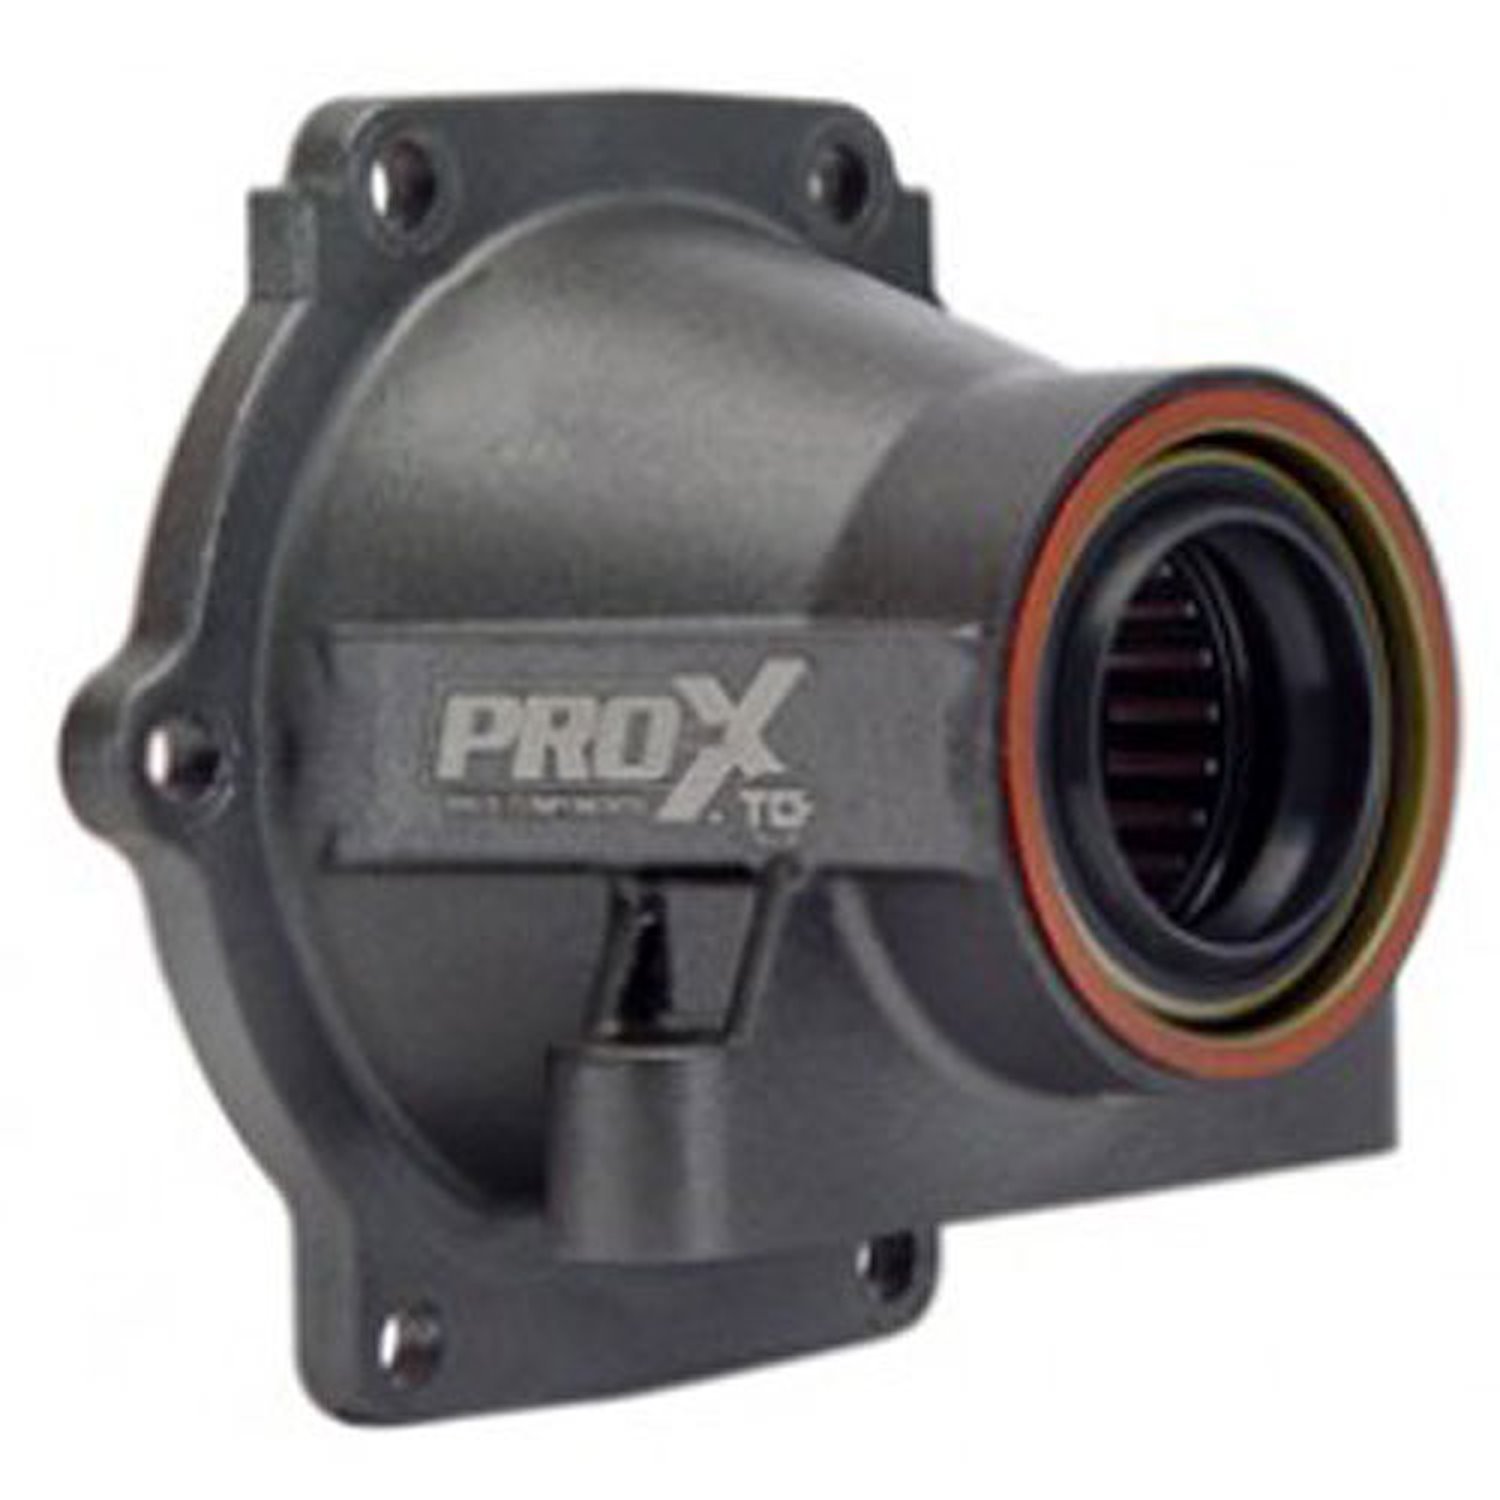 PRO-X TH400 Cast Aluminum Tailhousing With Roller Bearing